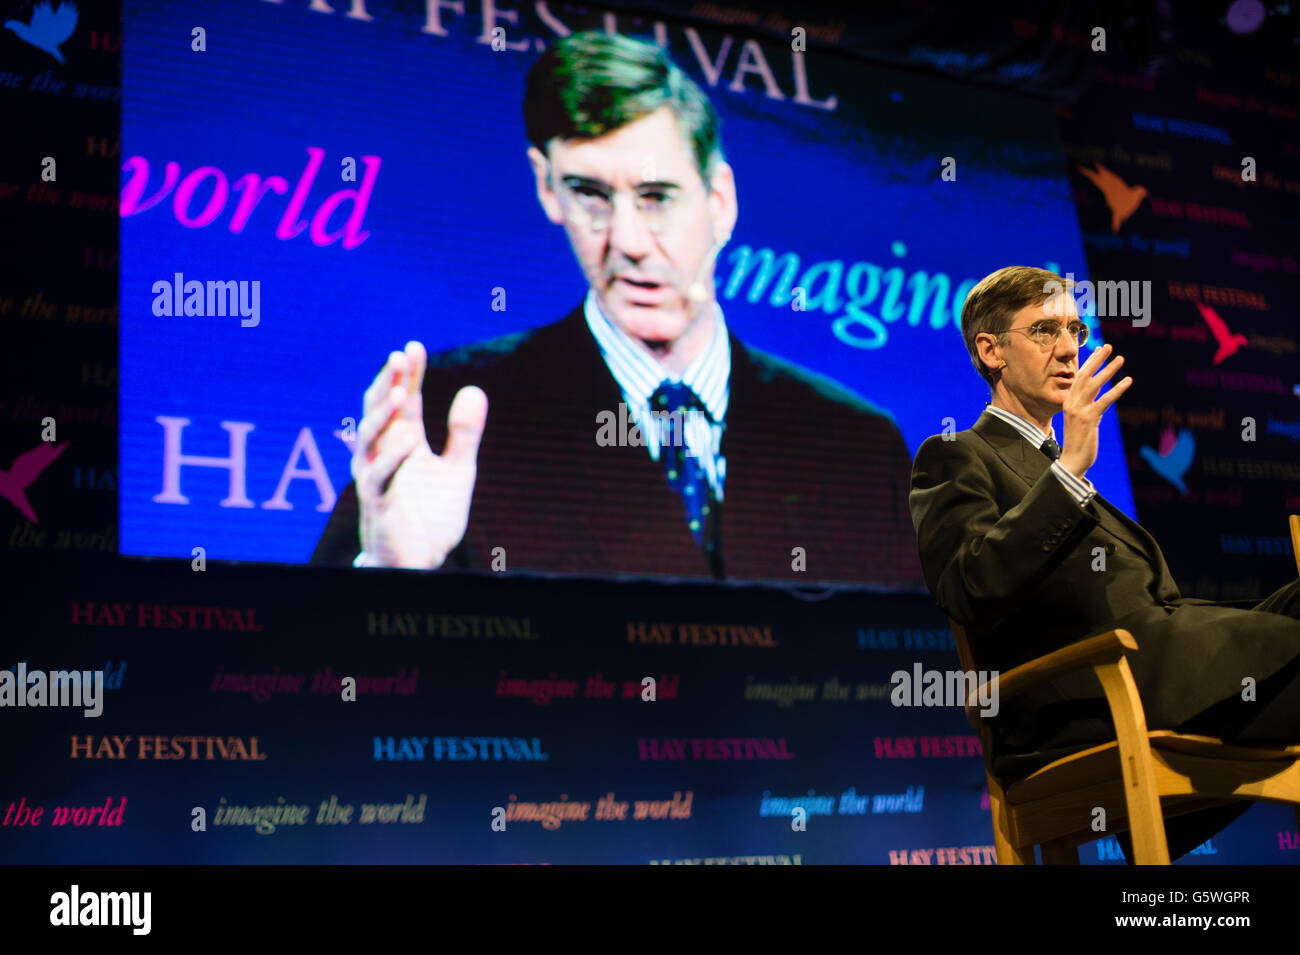 Jacob Rees-Mogg,  British Eurosceptic  pro-Brexit Conservative Party politician, MP for North East Somerset since 2010   The Hay Festival of Literature and the Arts, Hay on Wye, Powys, Wales UK, Sunday June 05 2016 Stock Photo